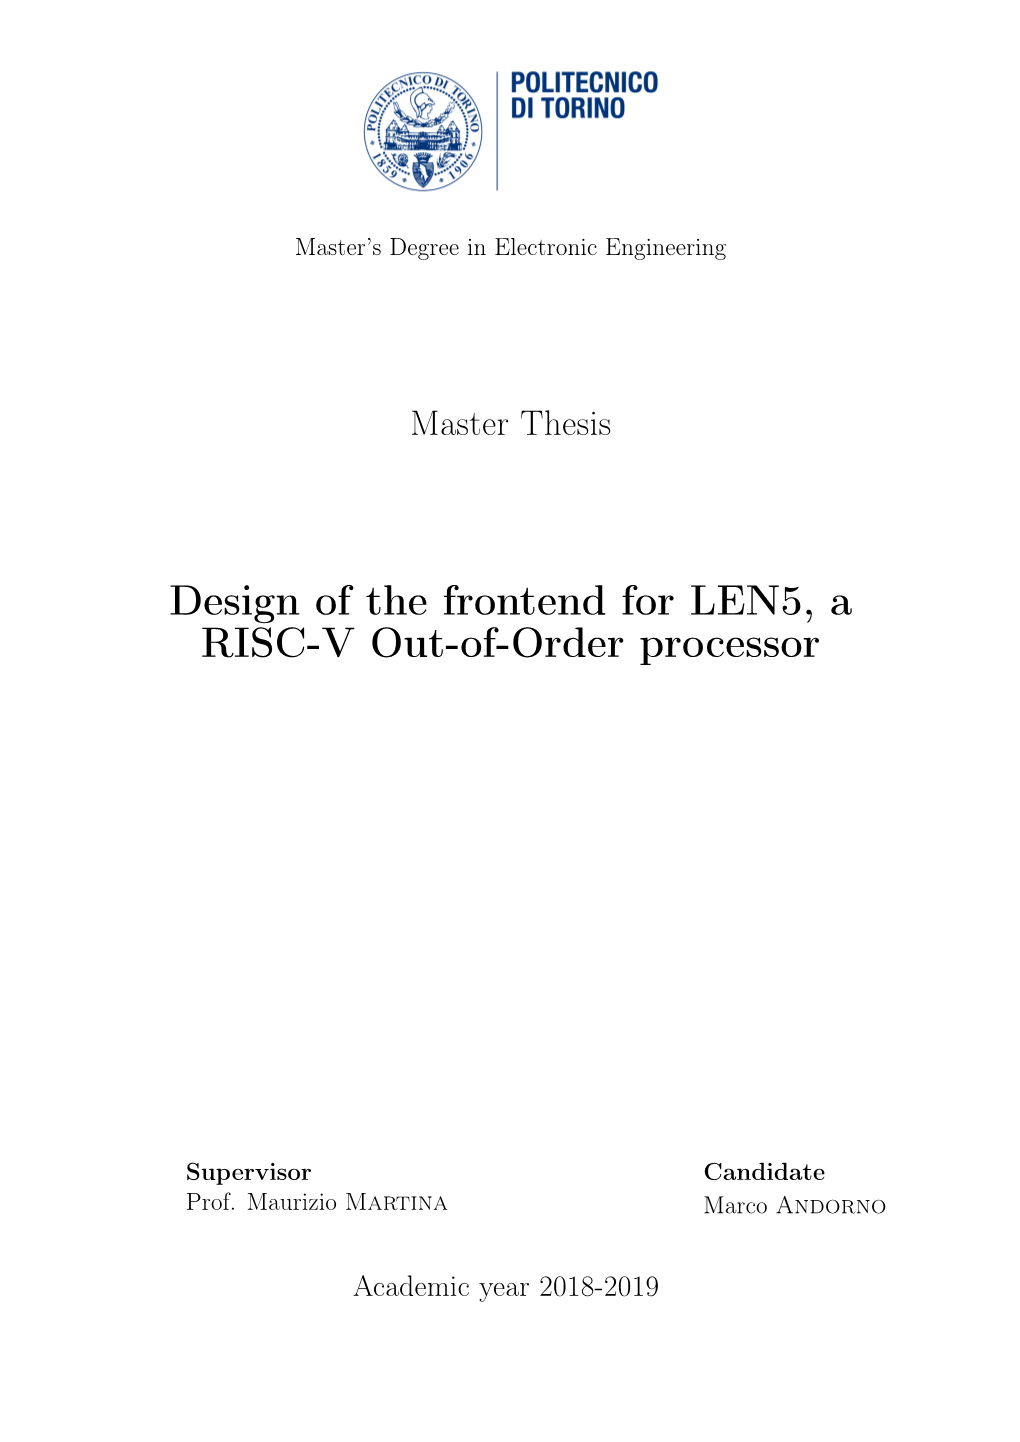 Design of the Frontend for LEN5, a RISC-V Out-Of-Order Processor